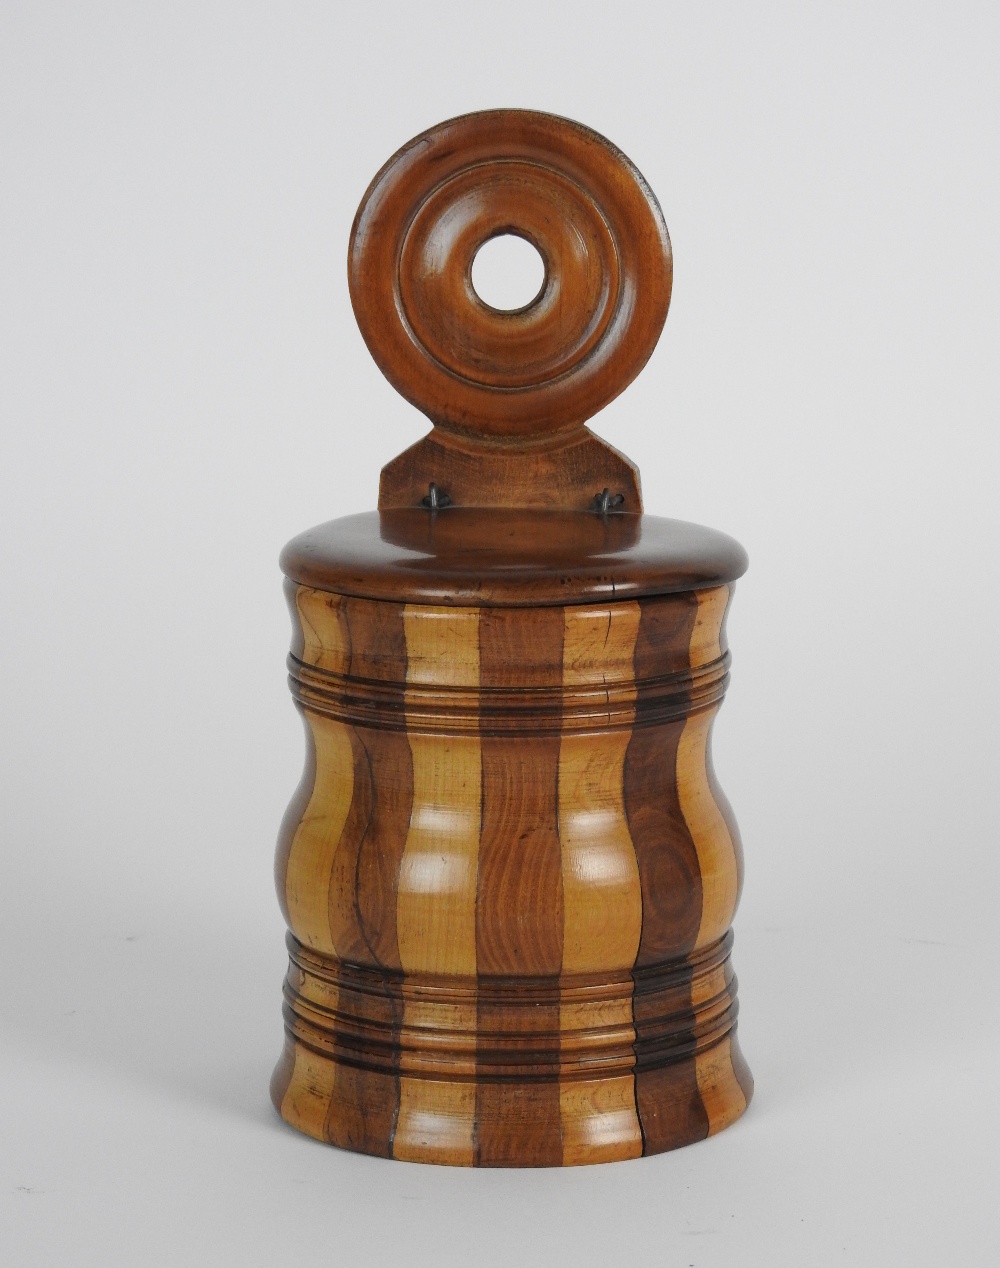 A mid 19th century Scottish baluster sectional salt box with bullseye hanging ring, 11.